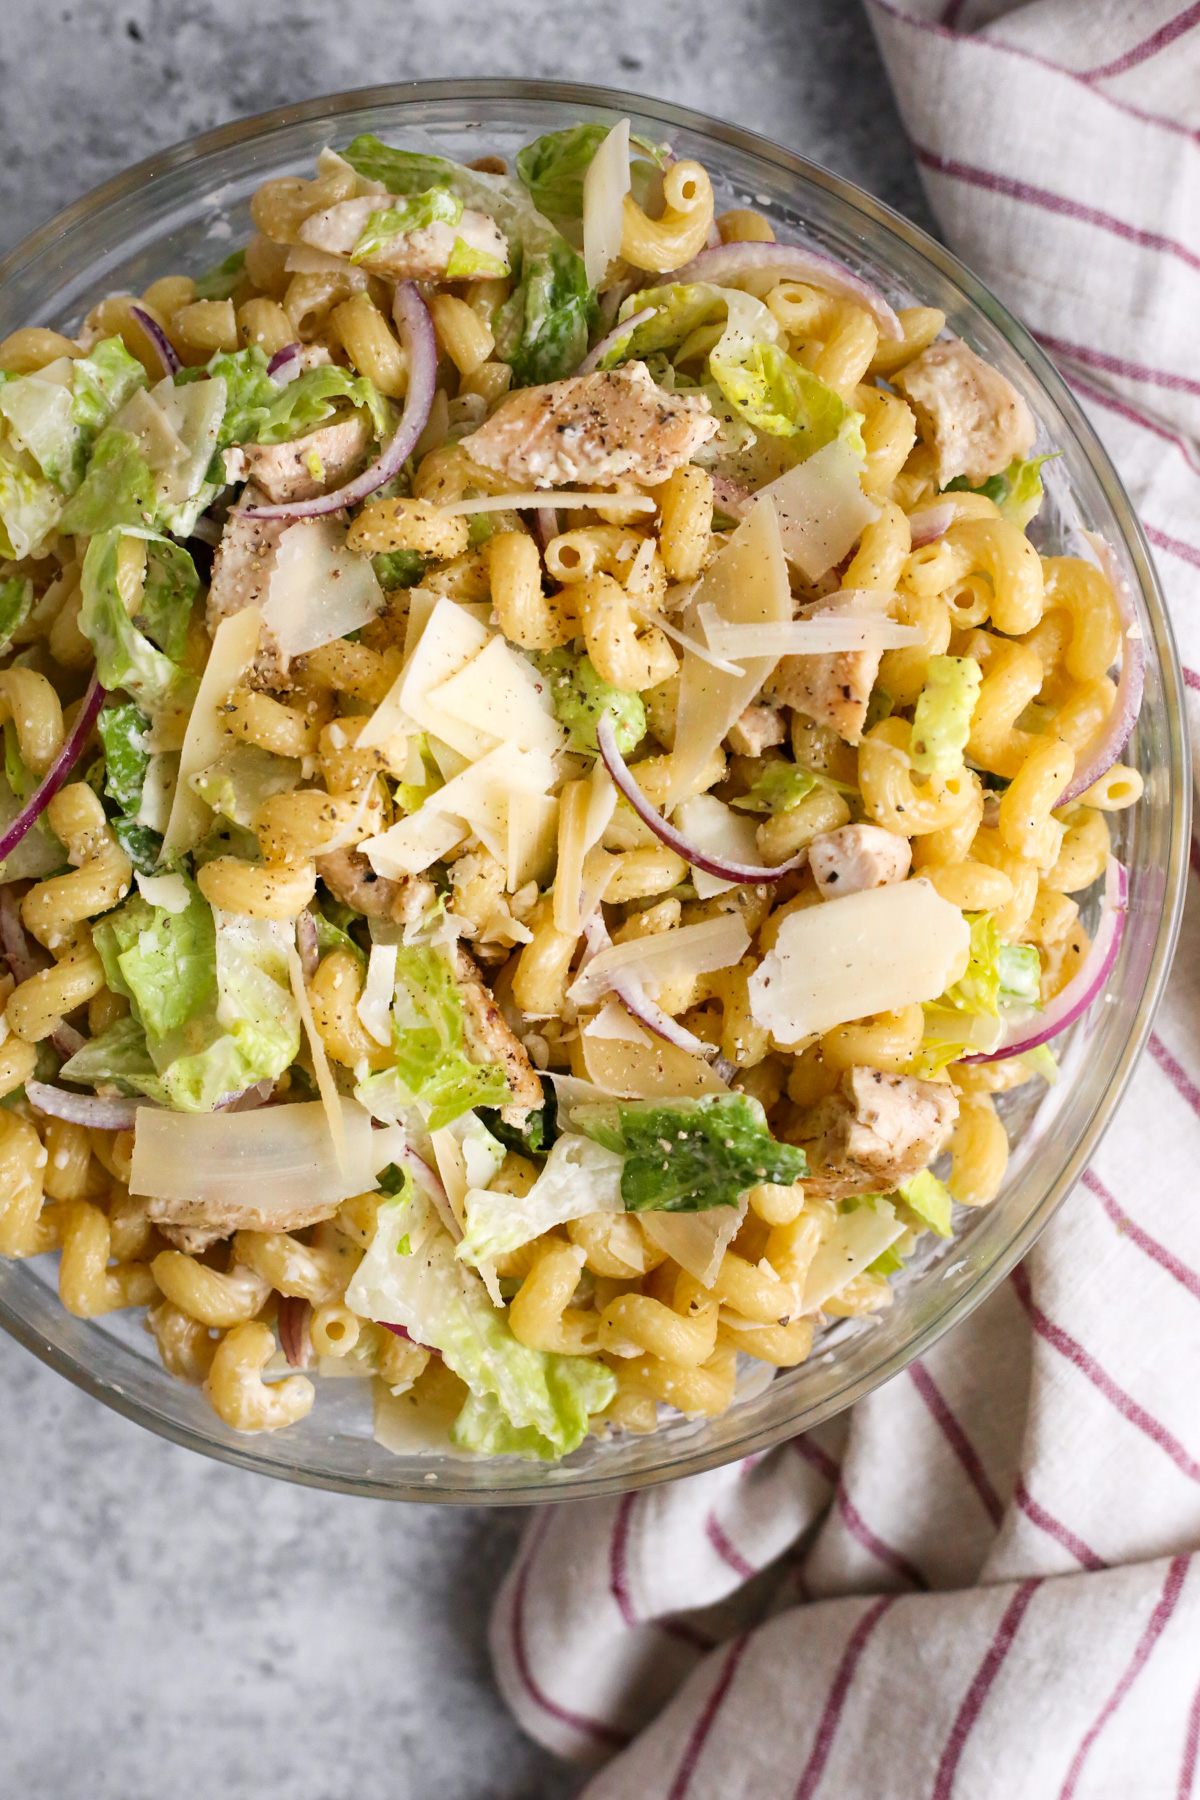 An overhead view of a creamy chicken Caesar pasta salad in a clear glass mixing bowl. The salad features cooked pasta, tender chicken pieces, crisp romaine lettuce, sliced red onions, and grated Parmesan cheese. The creamy Caesar dressing coats the ingredients, creating a delicious and visually appealing dish